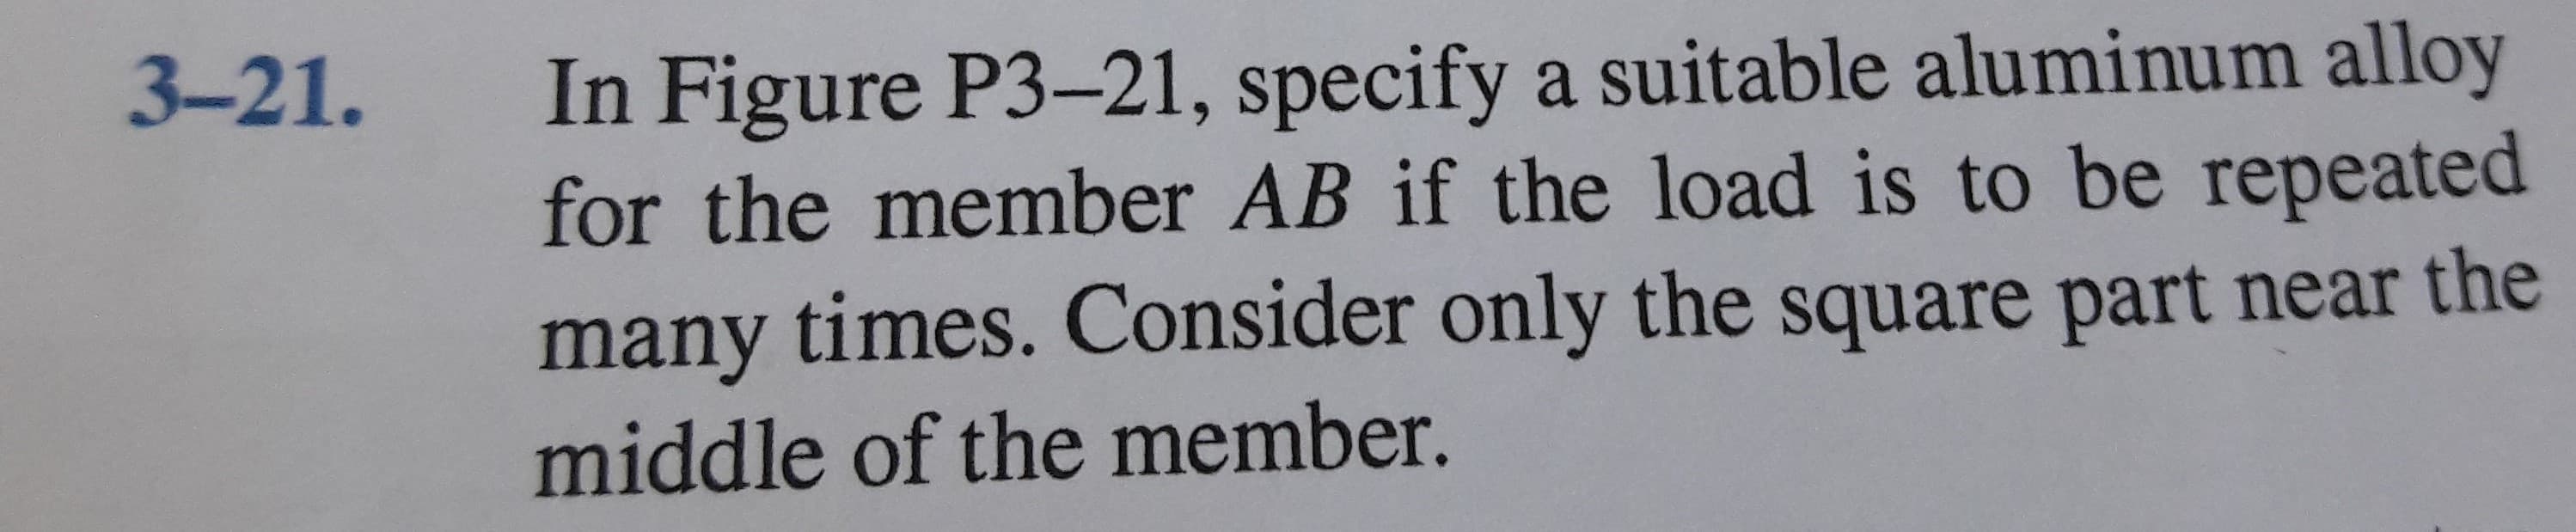 In Figure P3-21, specify a suitable aluminum alloy
for the member AB if the load is to be repeated
3-21.
many times. Consider only the square part near the
middle of the member.
